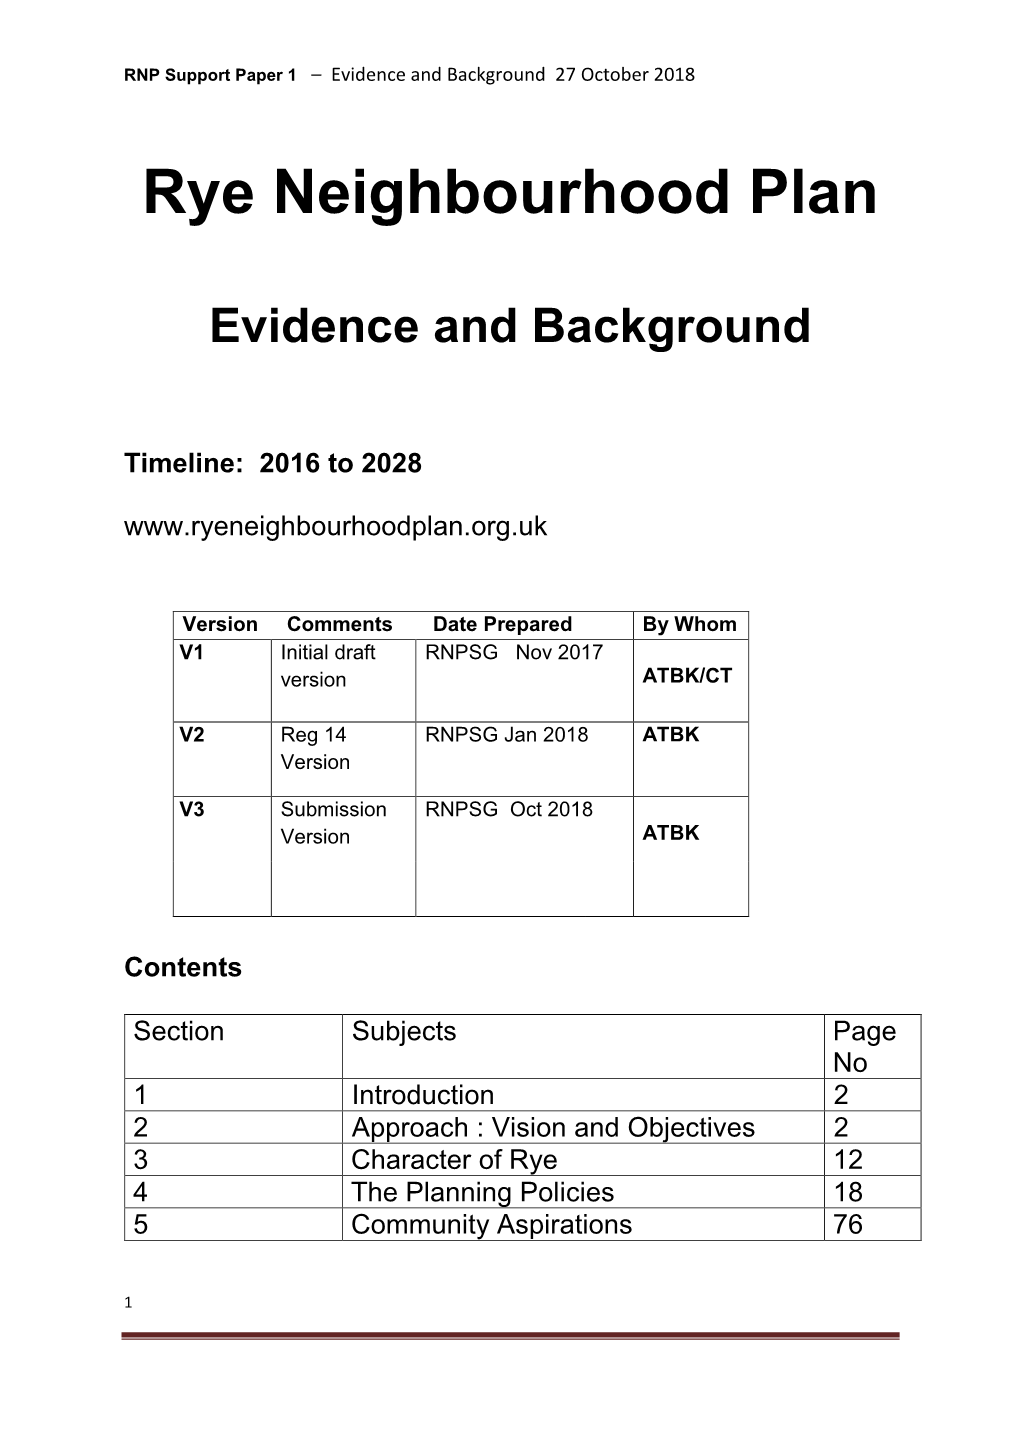 Rye NP – Evidence and Background (Oct 2018) (Pdf)